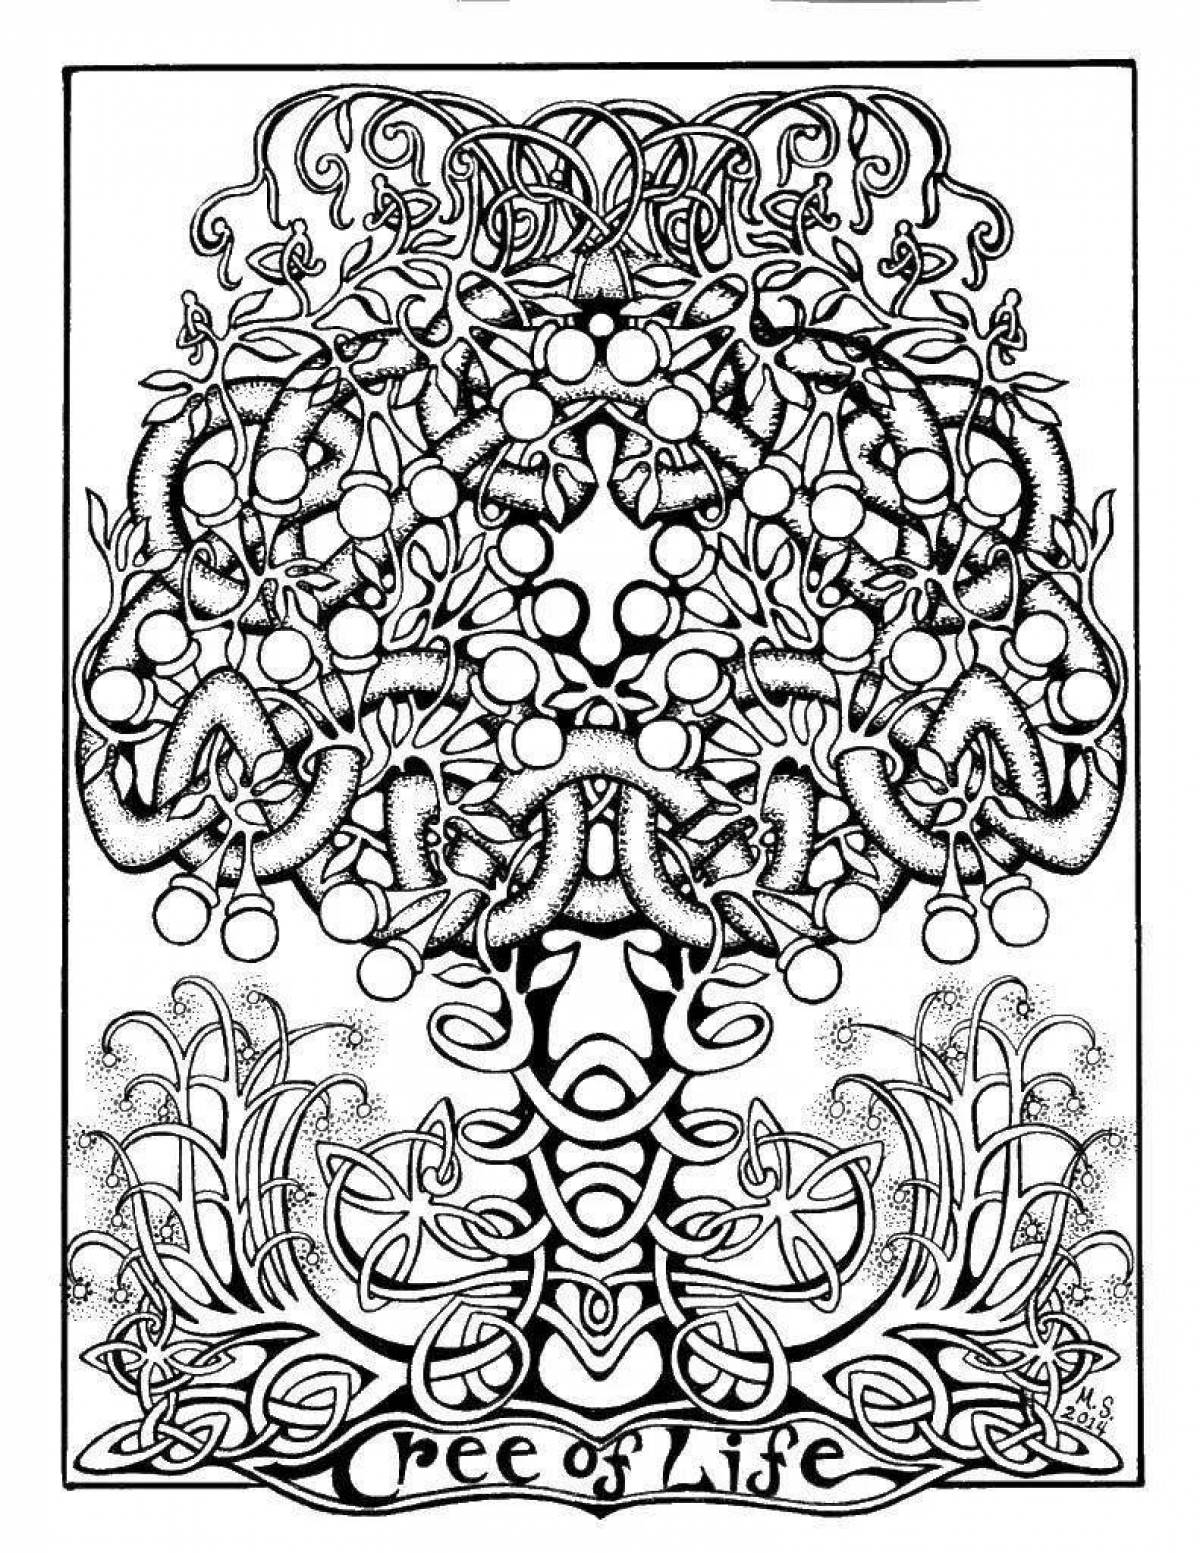 Exalted tree of life coloring page